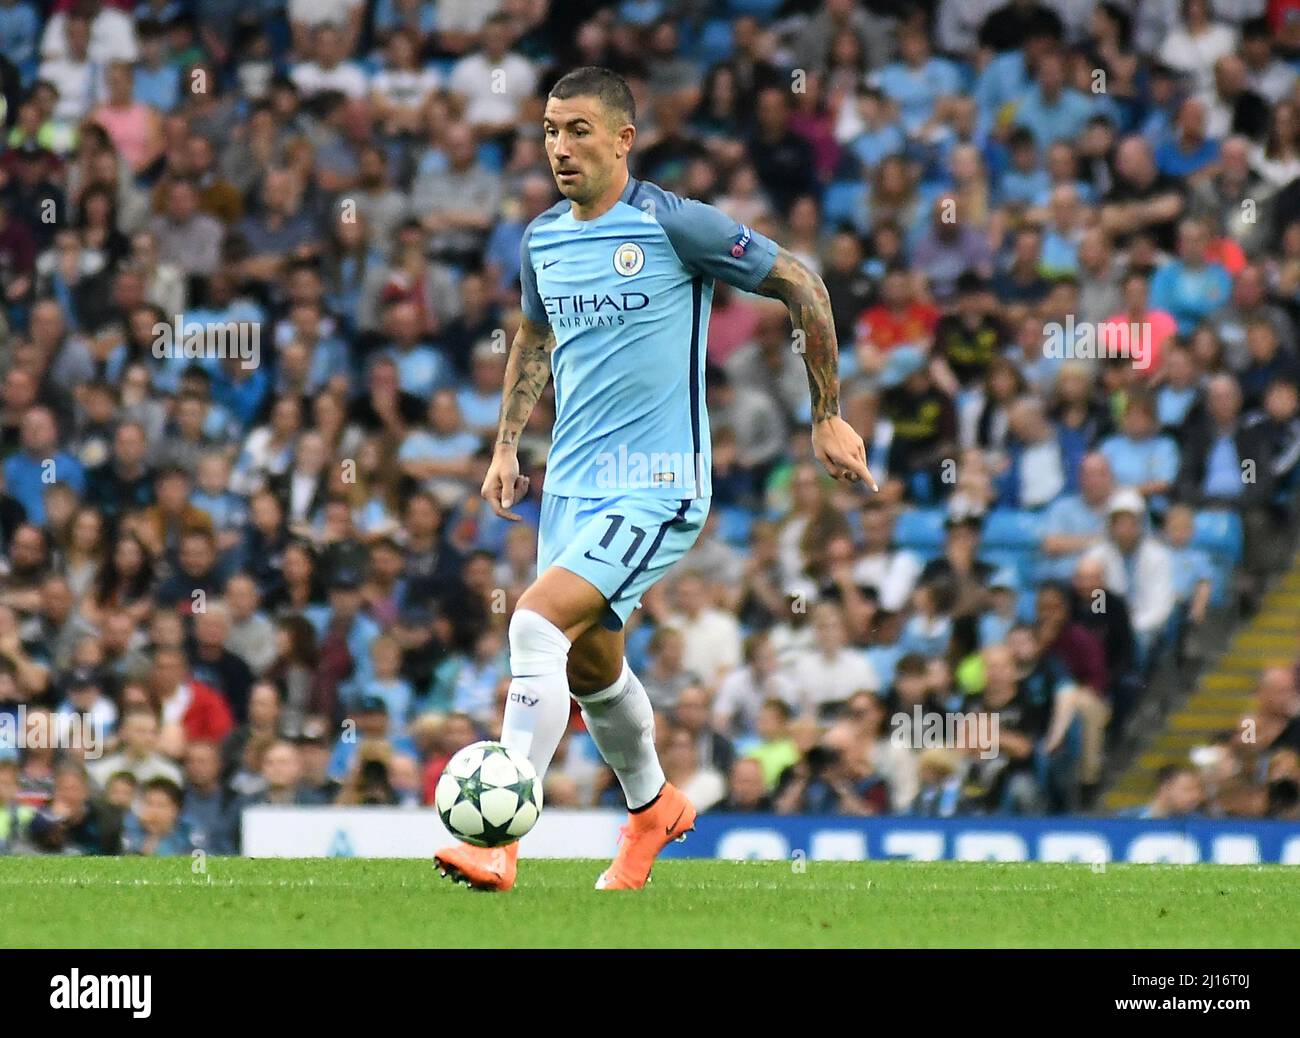 MANCHESTER, ENGLAND - AUGUST 24, 2016: Aleksandar Kolarov of City pictured during the second leg of the 2016/17 UEFA Champions League tie between Manchester City (Engalnd) and FCSB (Romania) at Etihad Stadium. Copyright: Cosmin Iftode/Picstaff Stock Photo